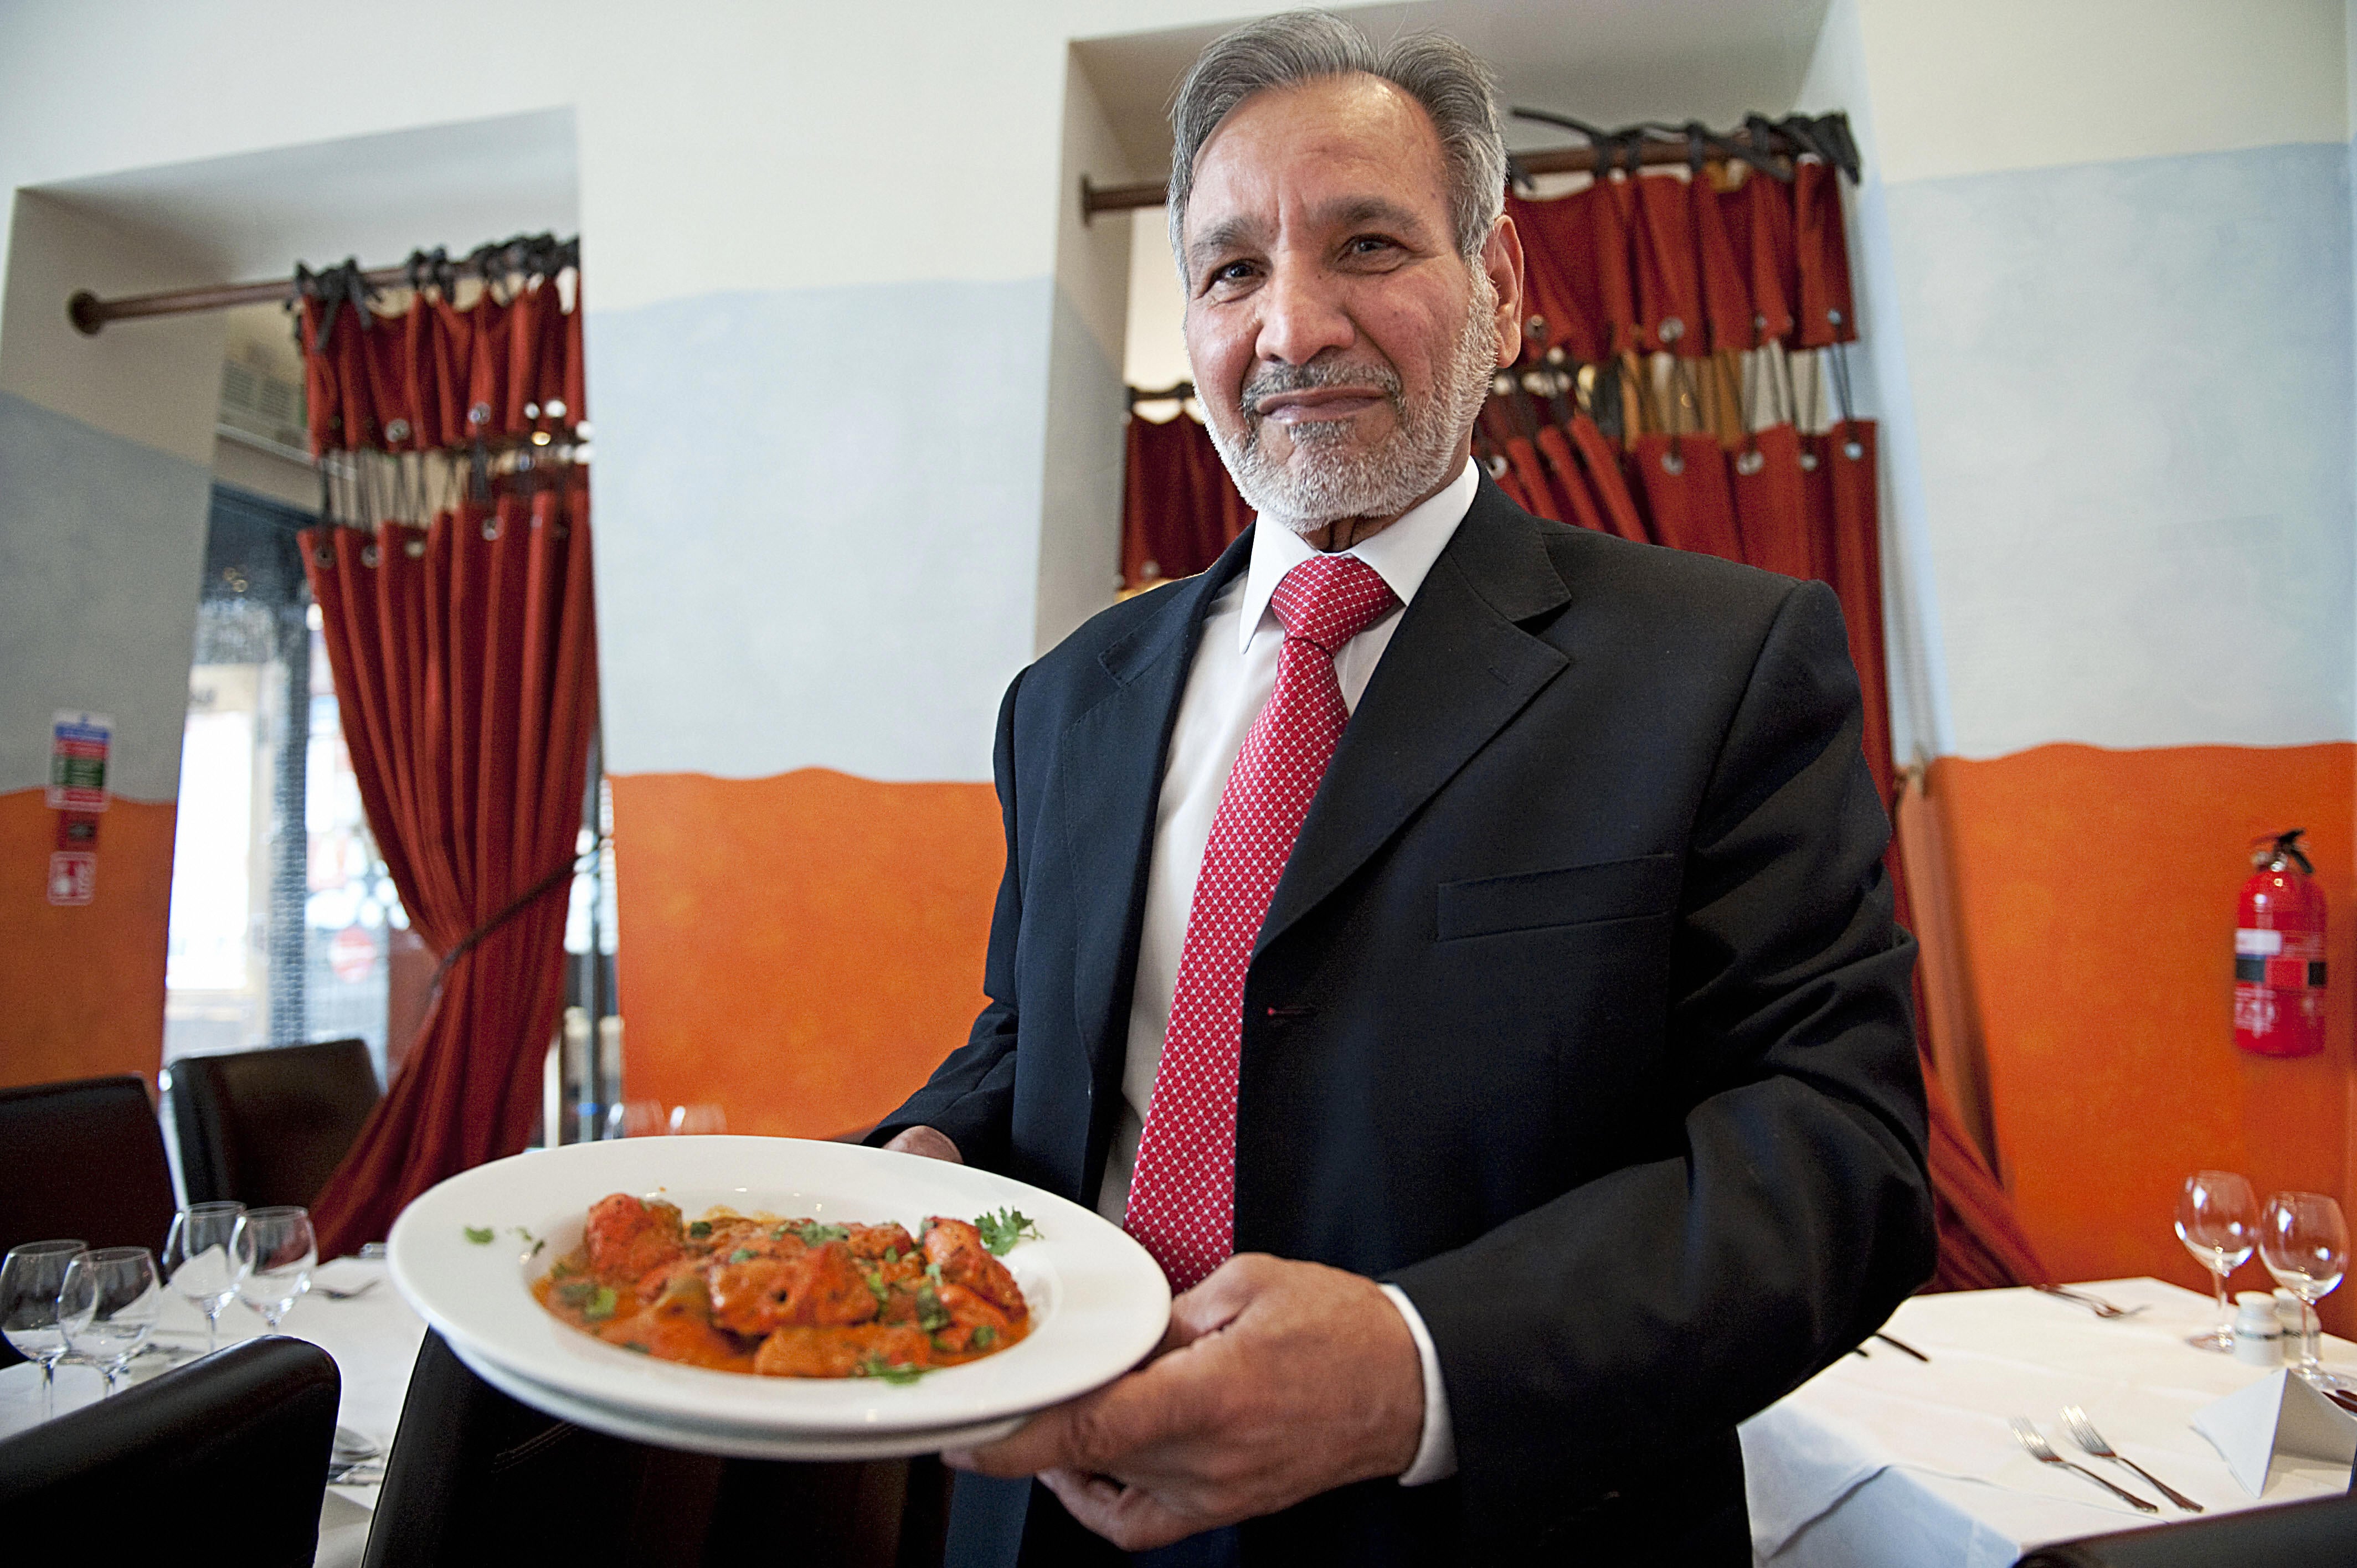 Ahmed Aslam Ali, the owner of the Shish Mahal restaurant in Glasgow, is pictured with a plate of chicken tikka masala in his restaurant in 2009